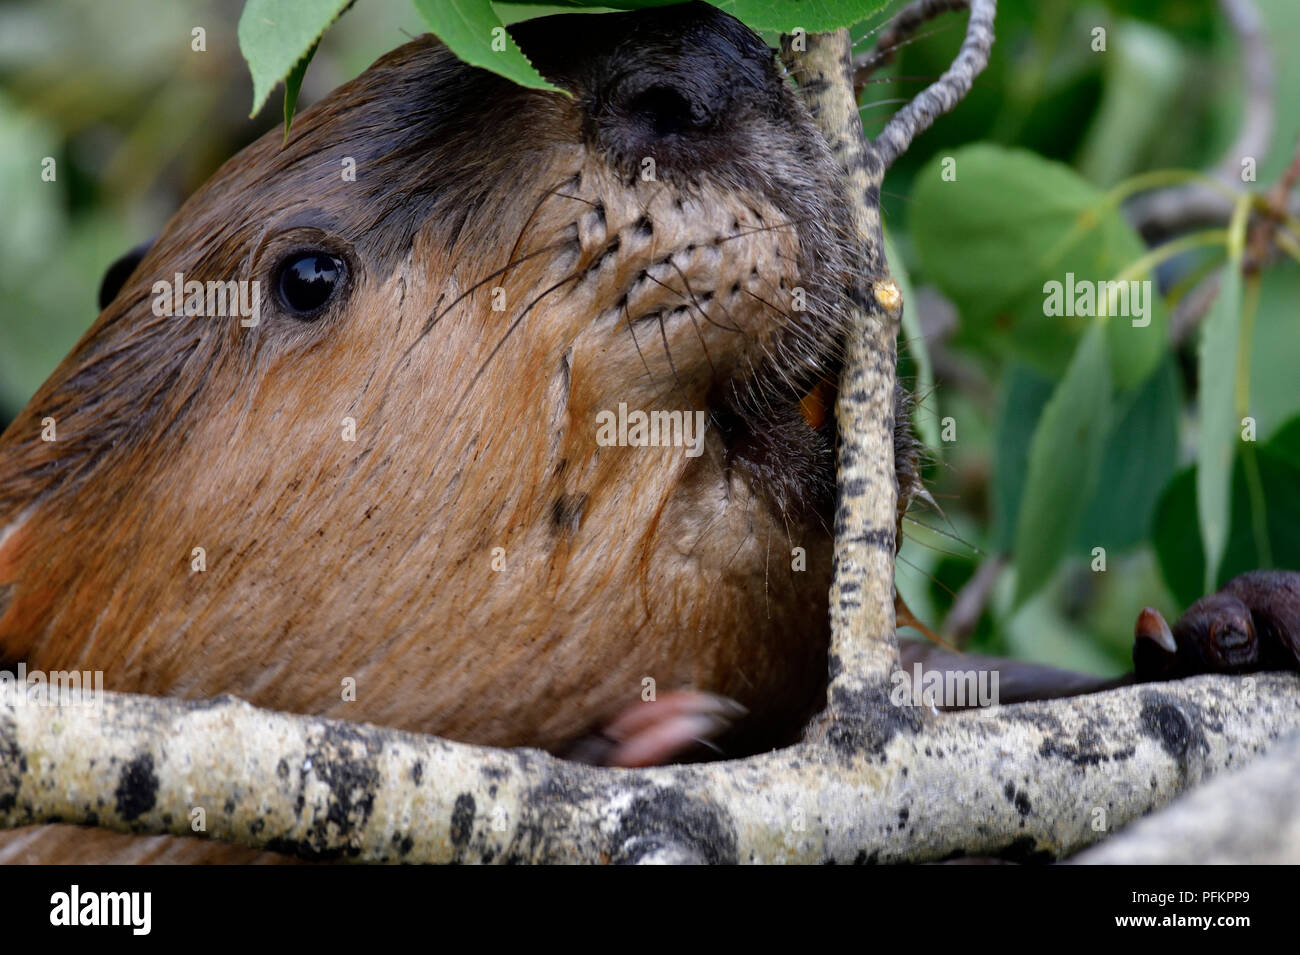 A close up image of a wild beaver's  'Castor canadenis' face as he is about to cut a tree branch to eat Stock Photo